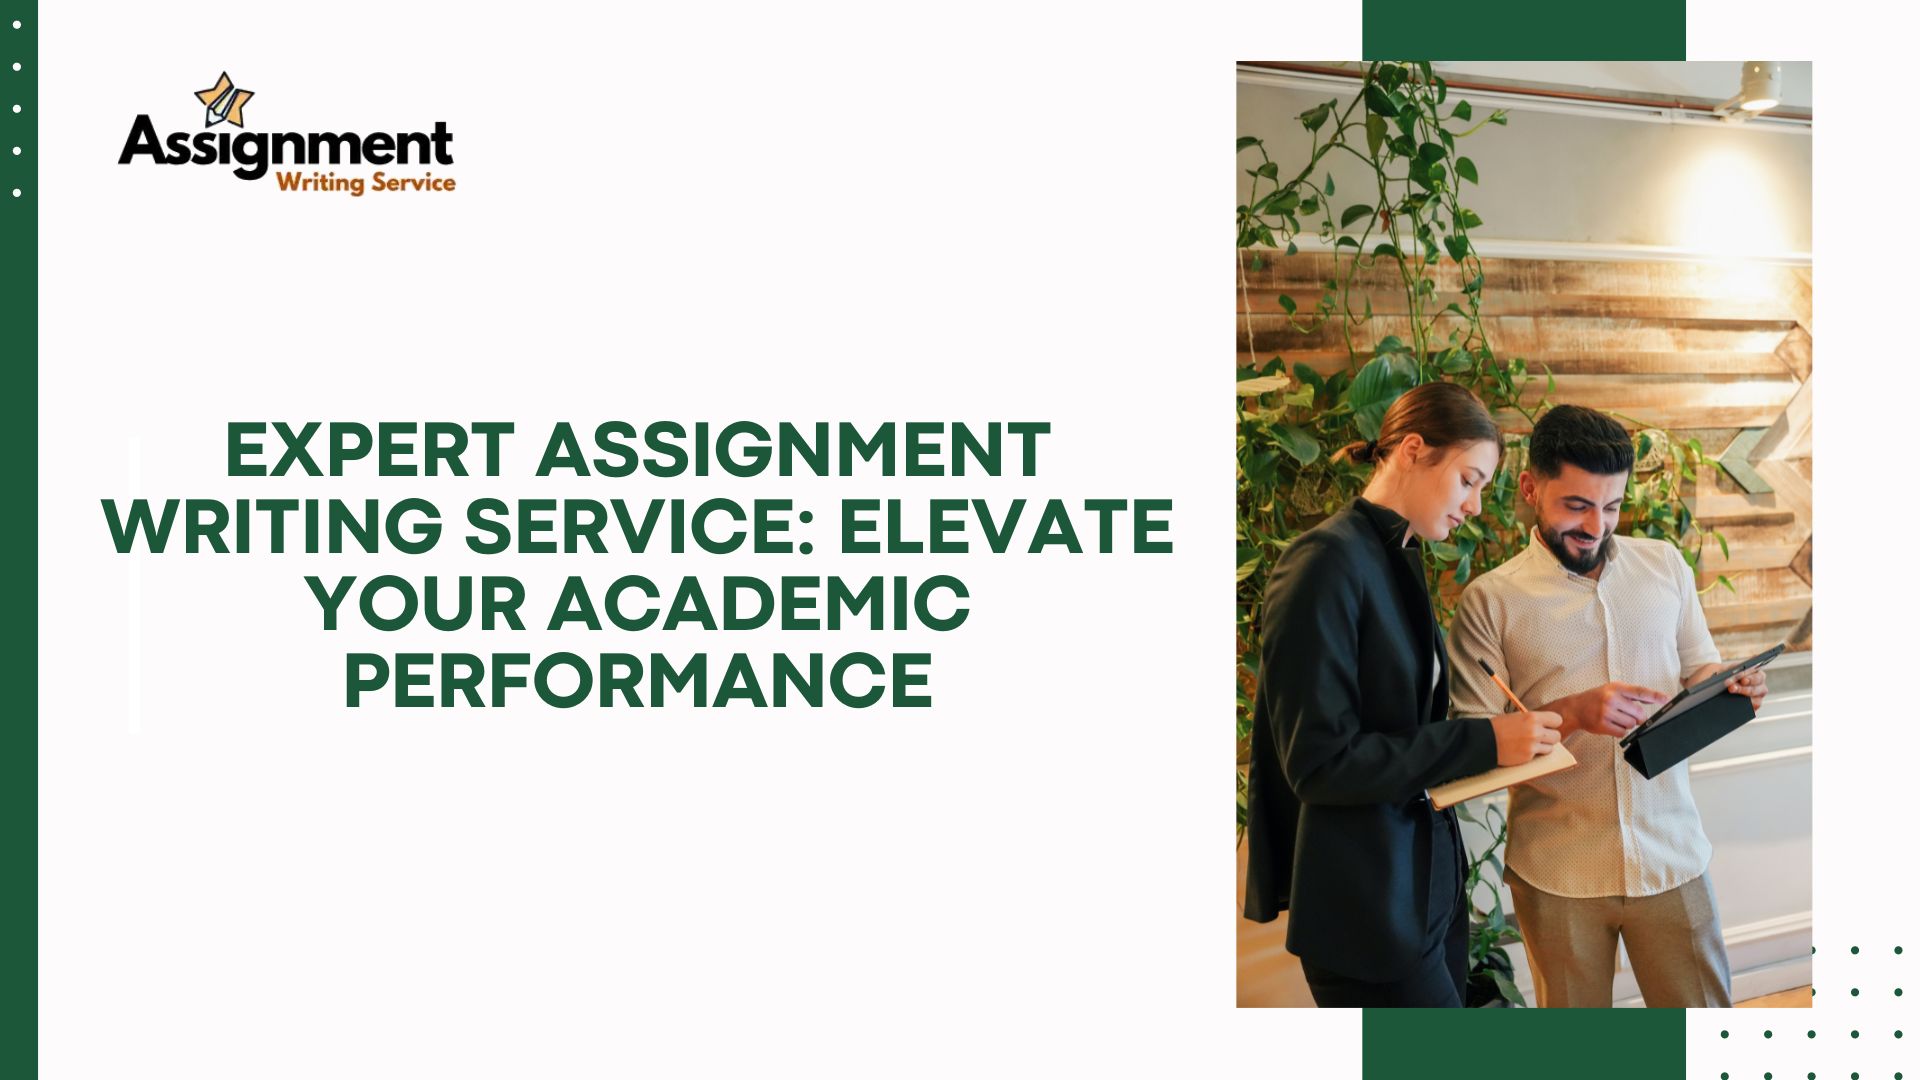 Expert Assignment Writing Service: Elevate Your Academic Performance